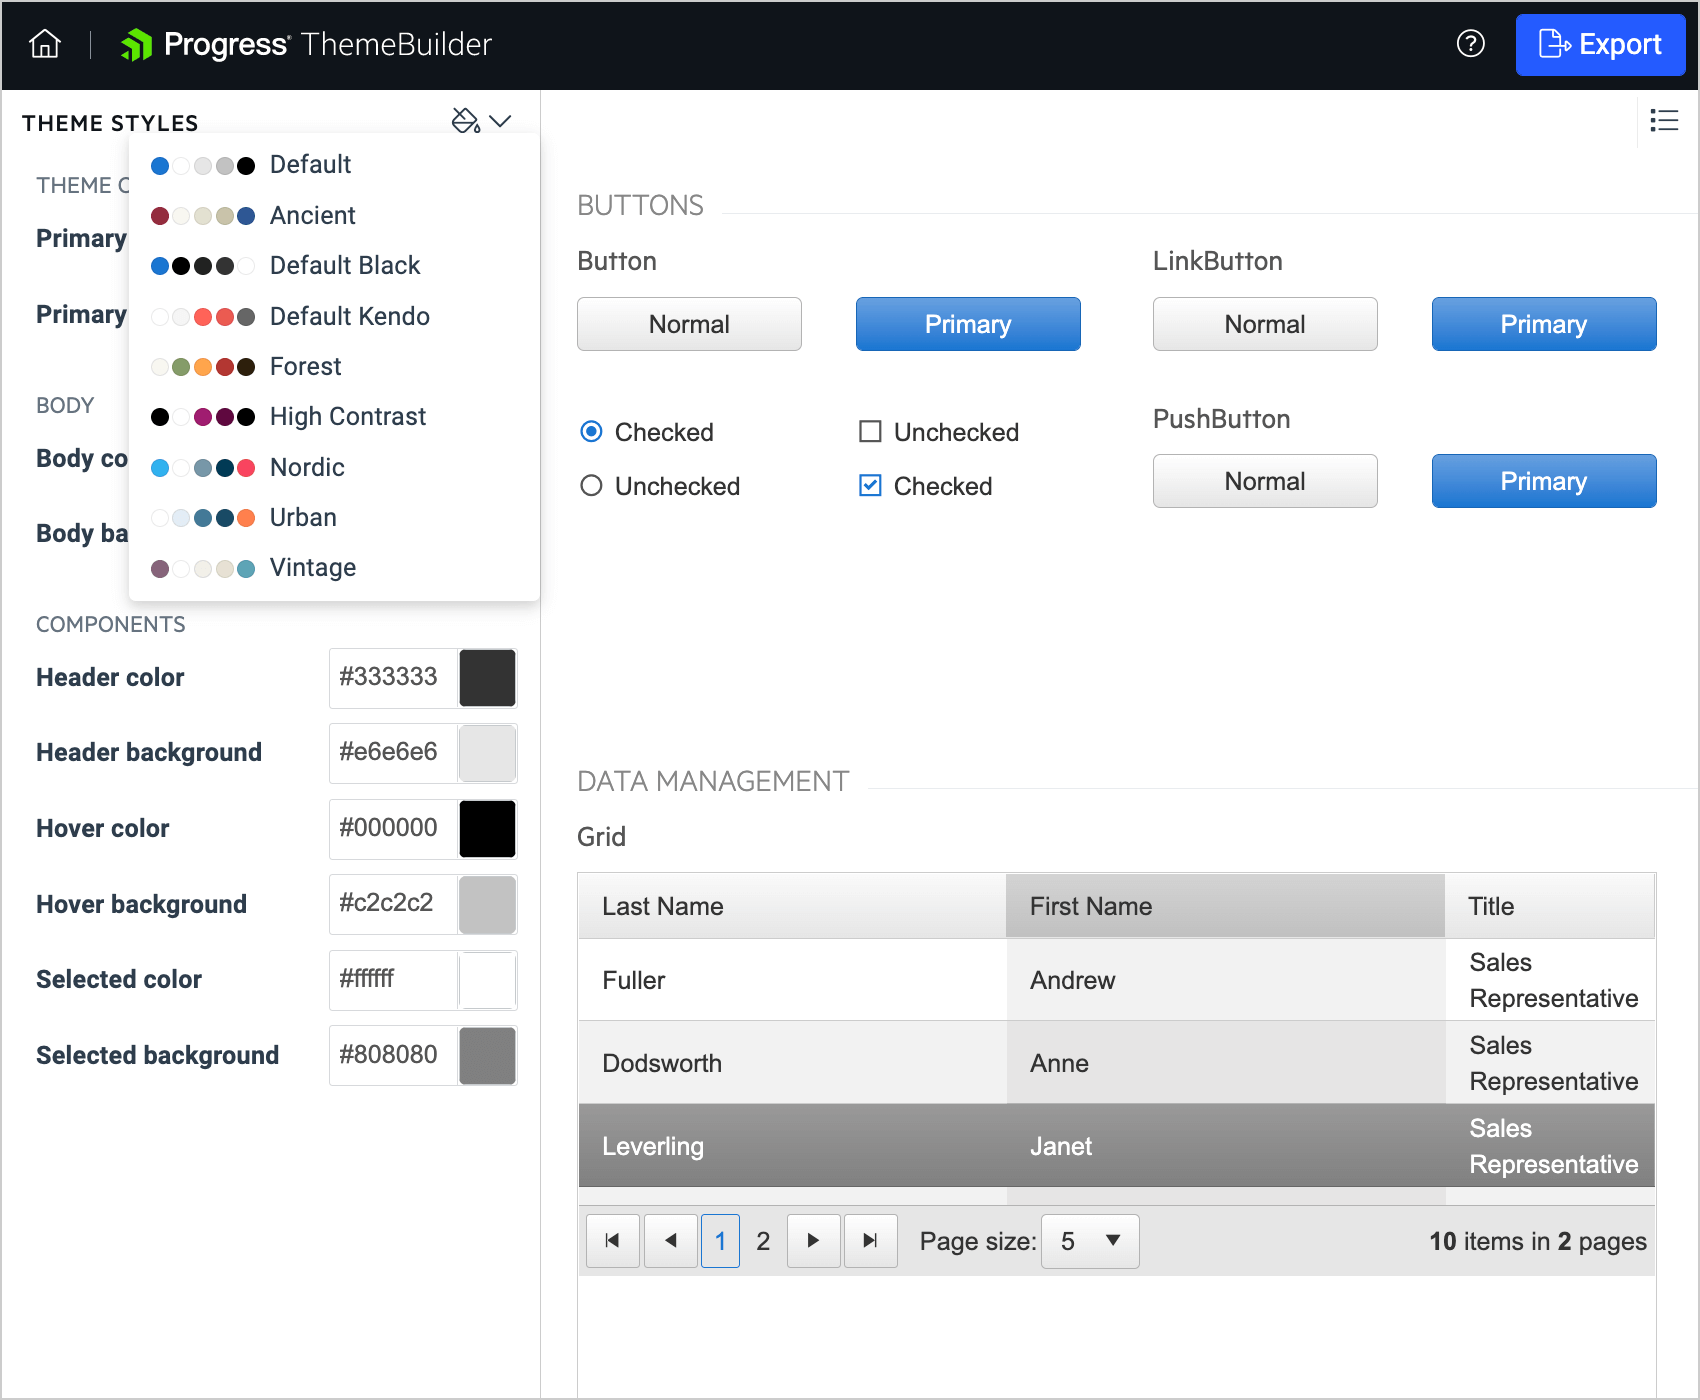 Theme Preview in ThemeBuilder